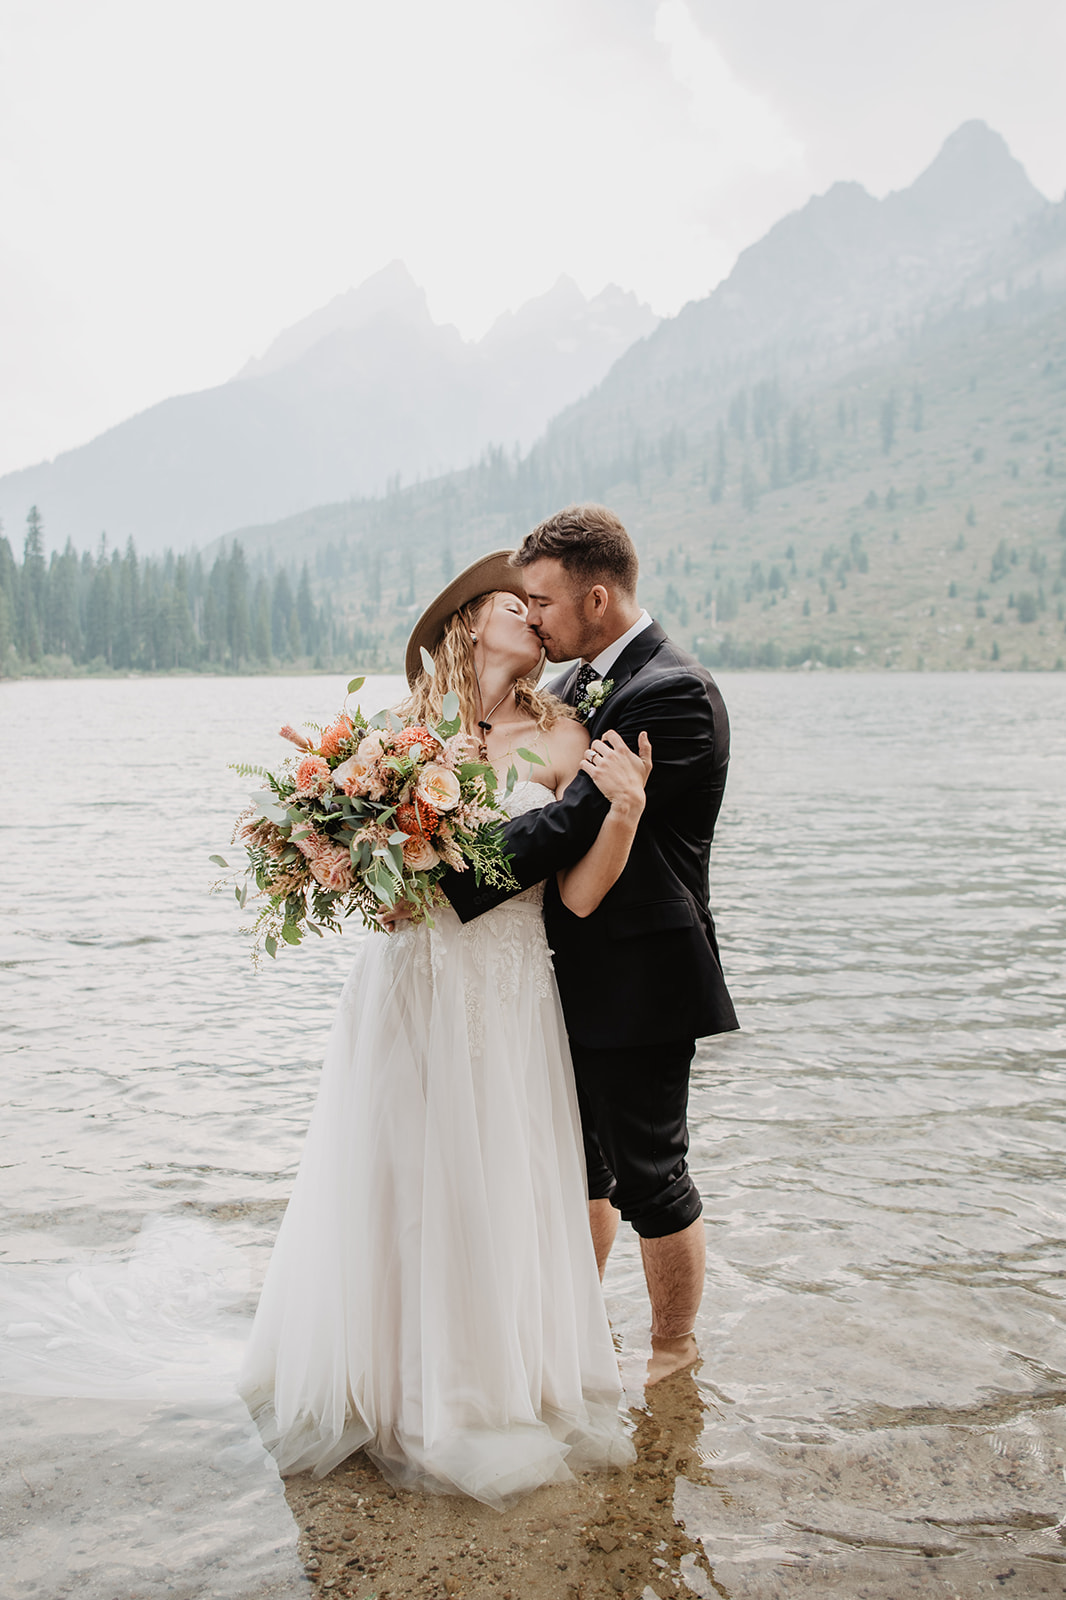 Jackson Hole elopement with bride and groom standing the lake and kissing while the bride wears a tan hat and holds her wedding florals as her groom kisses her passionately